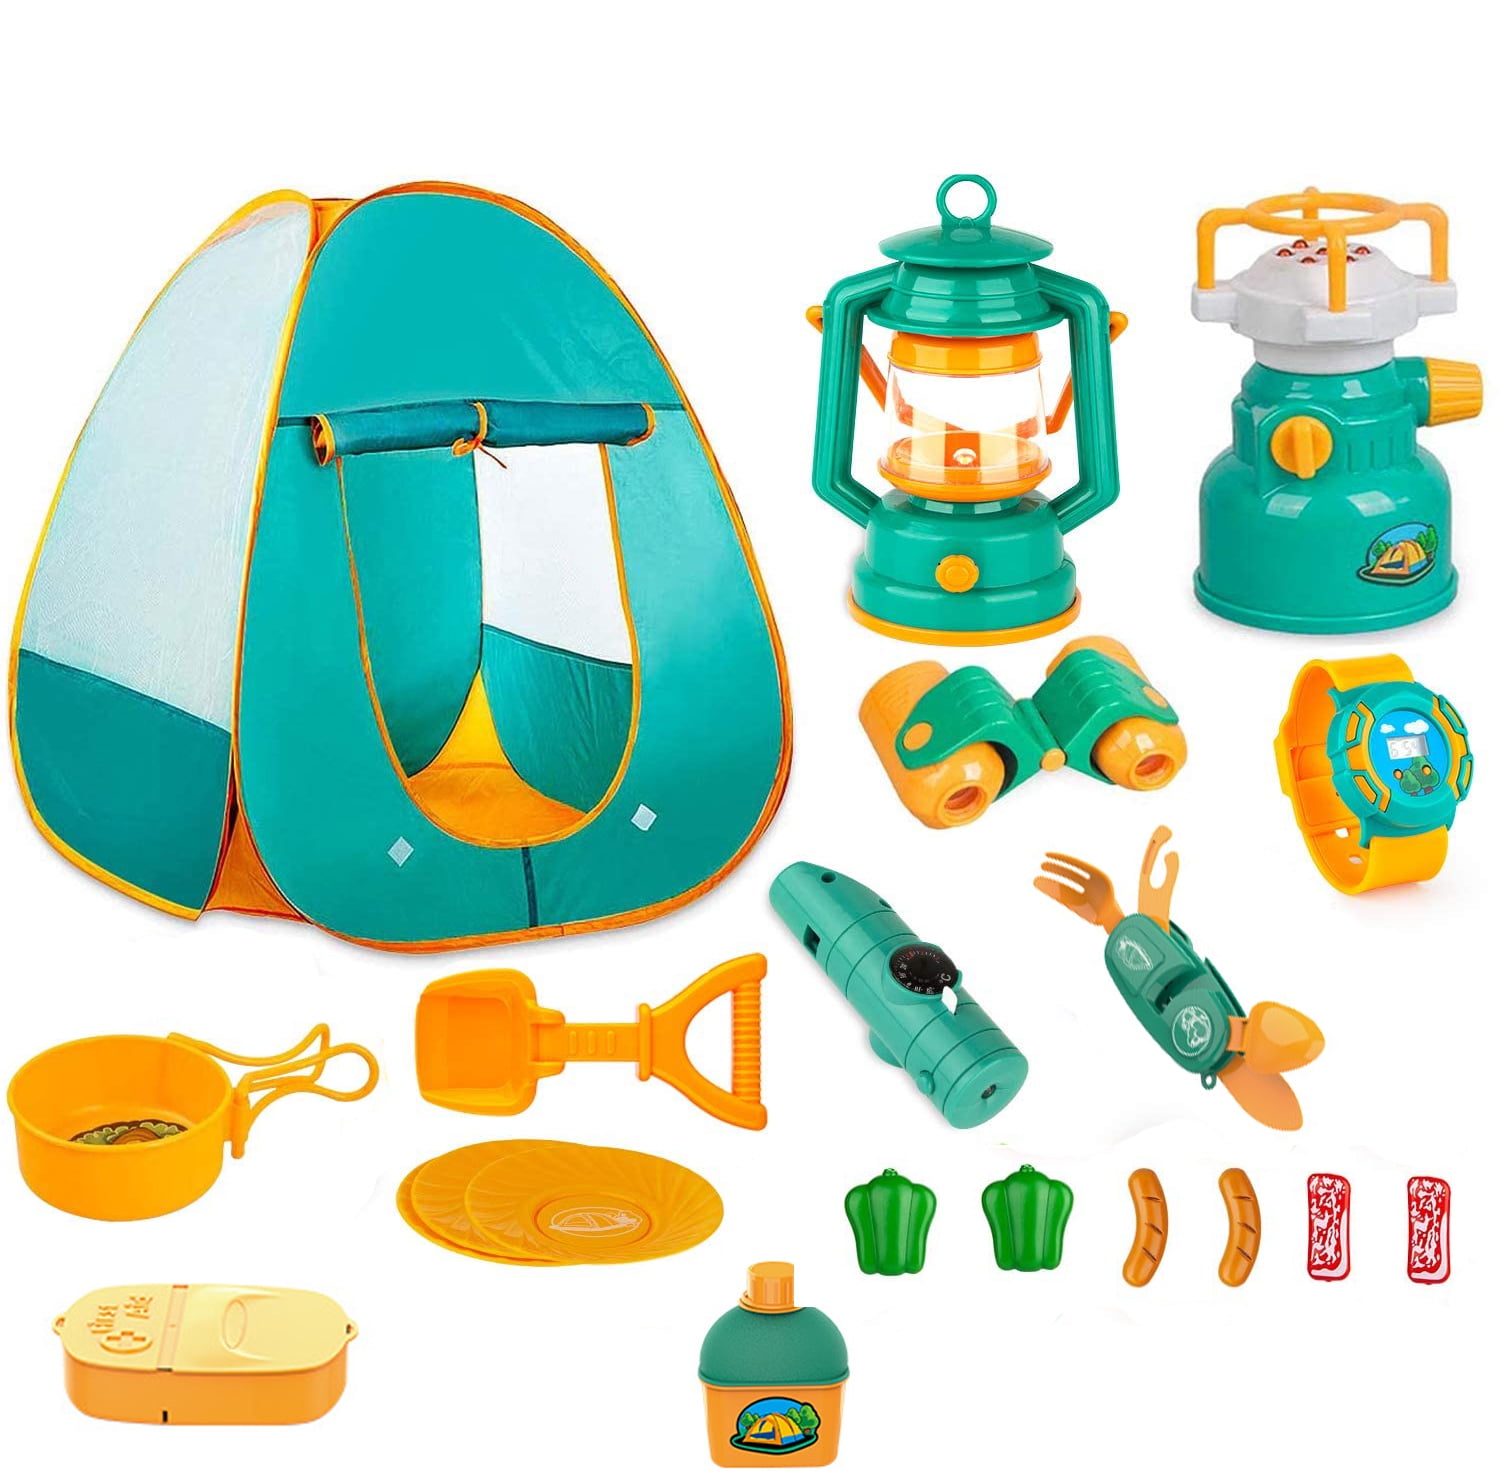 19pcs Kids Camping Set with Tent Camping Gear Tool Pretend Play Set for  Toddlers Kids Boys Girls Outdoor Christmas Birthday Gift 